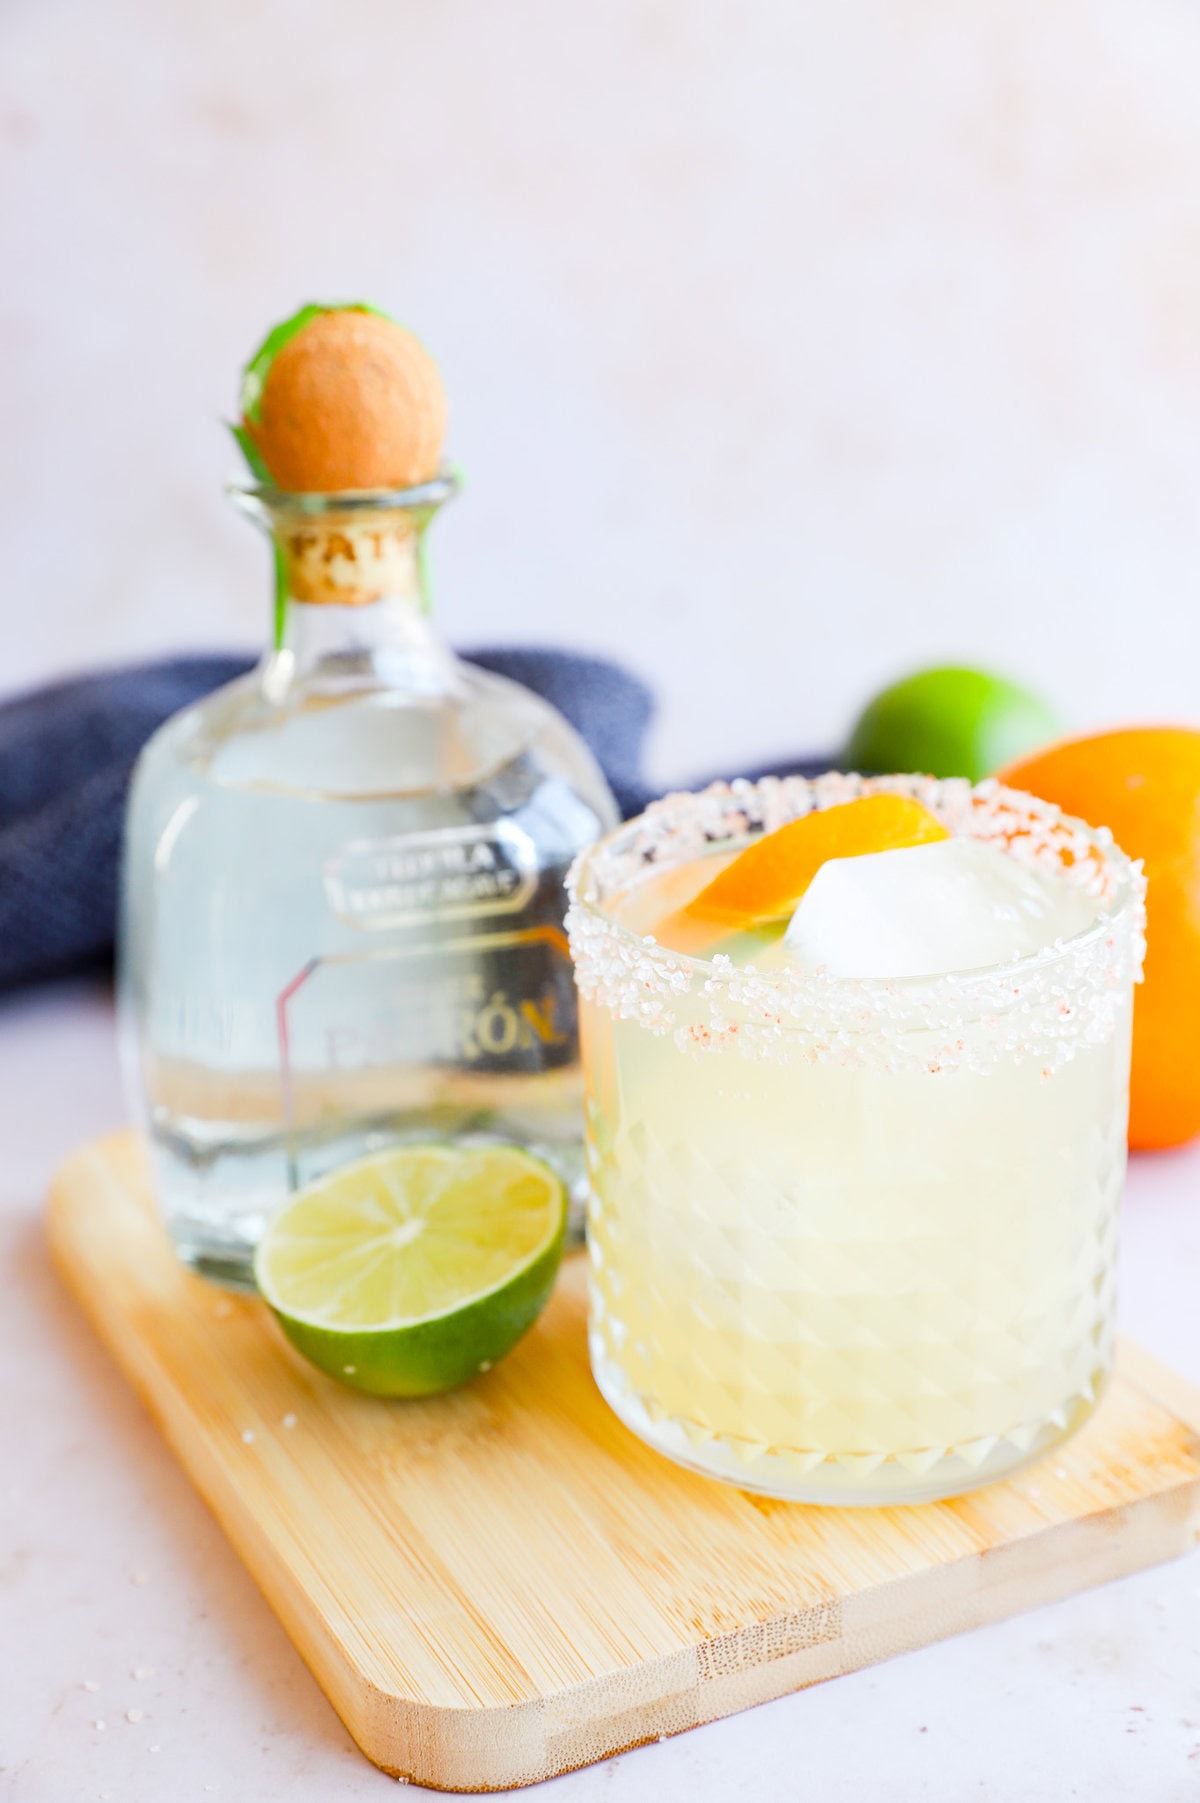 Patron bottle with a margarita in a salt rimmed glass and citrus garnish